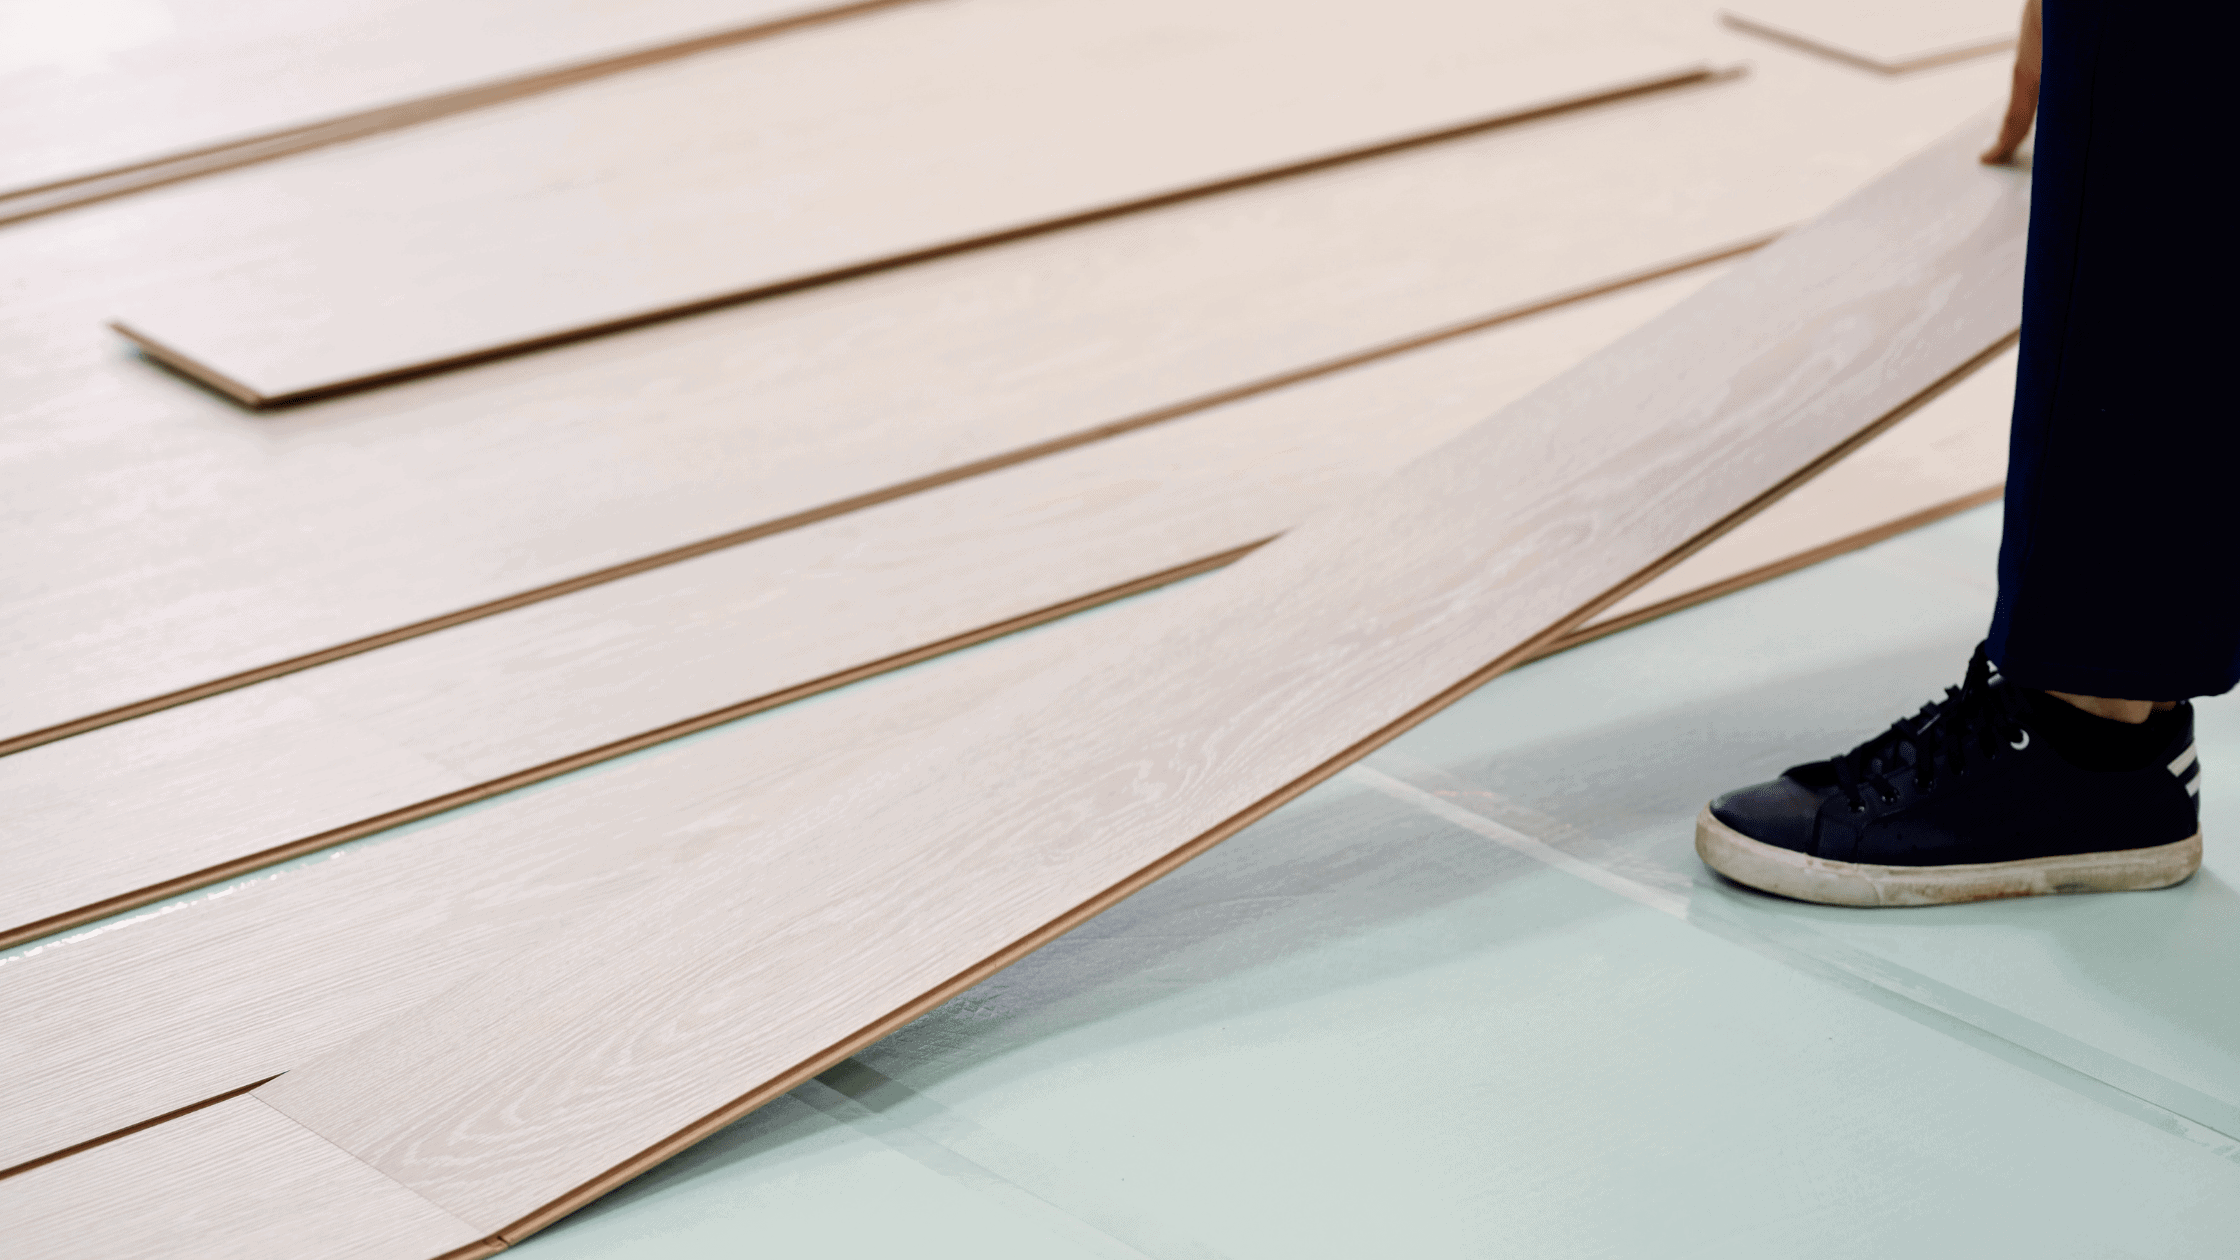 How To Install Vinyl Plank Flooring On Concrete: 11 DIY Steps To Start Now